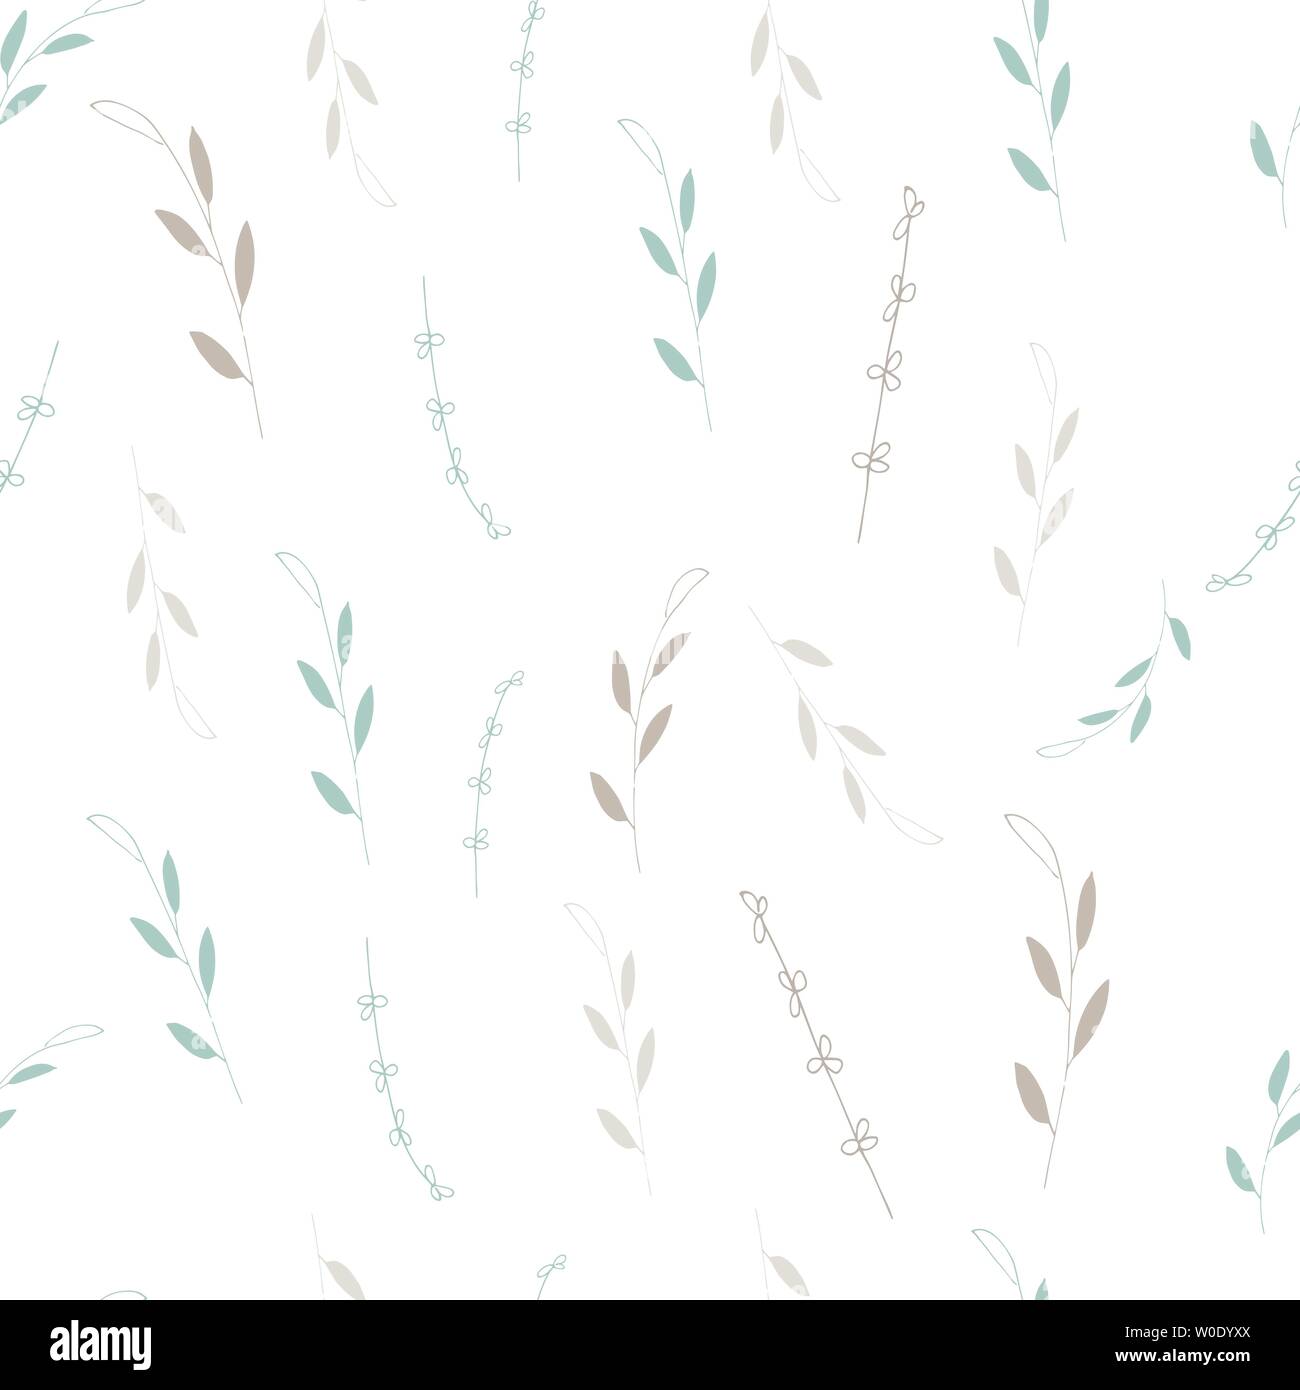 Seamless pattern of abstract branches and flowers on a white background. hand drawn vector illustration Stock Vector